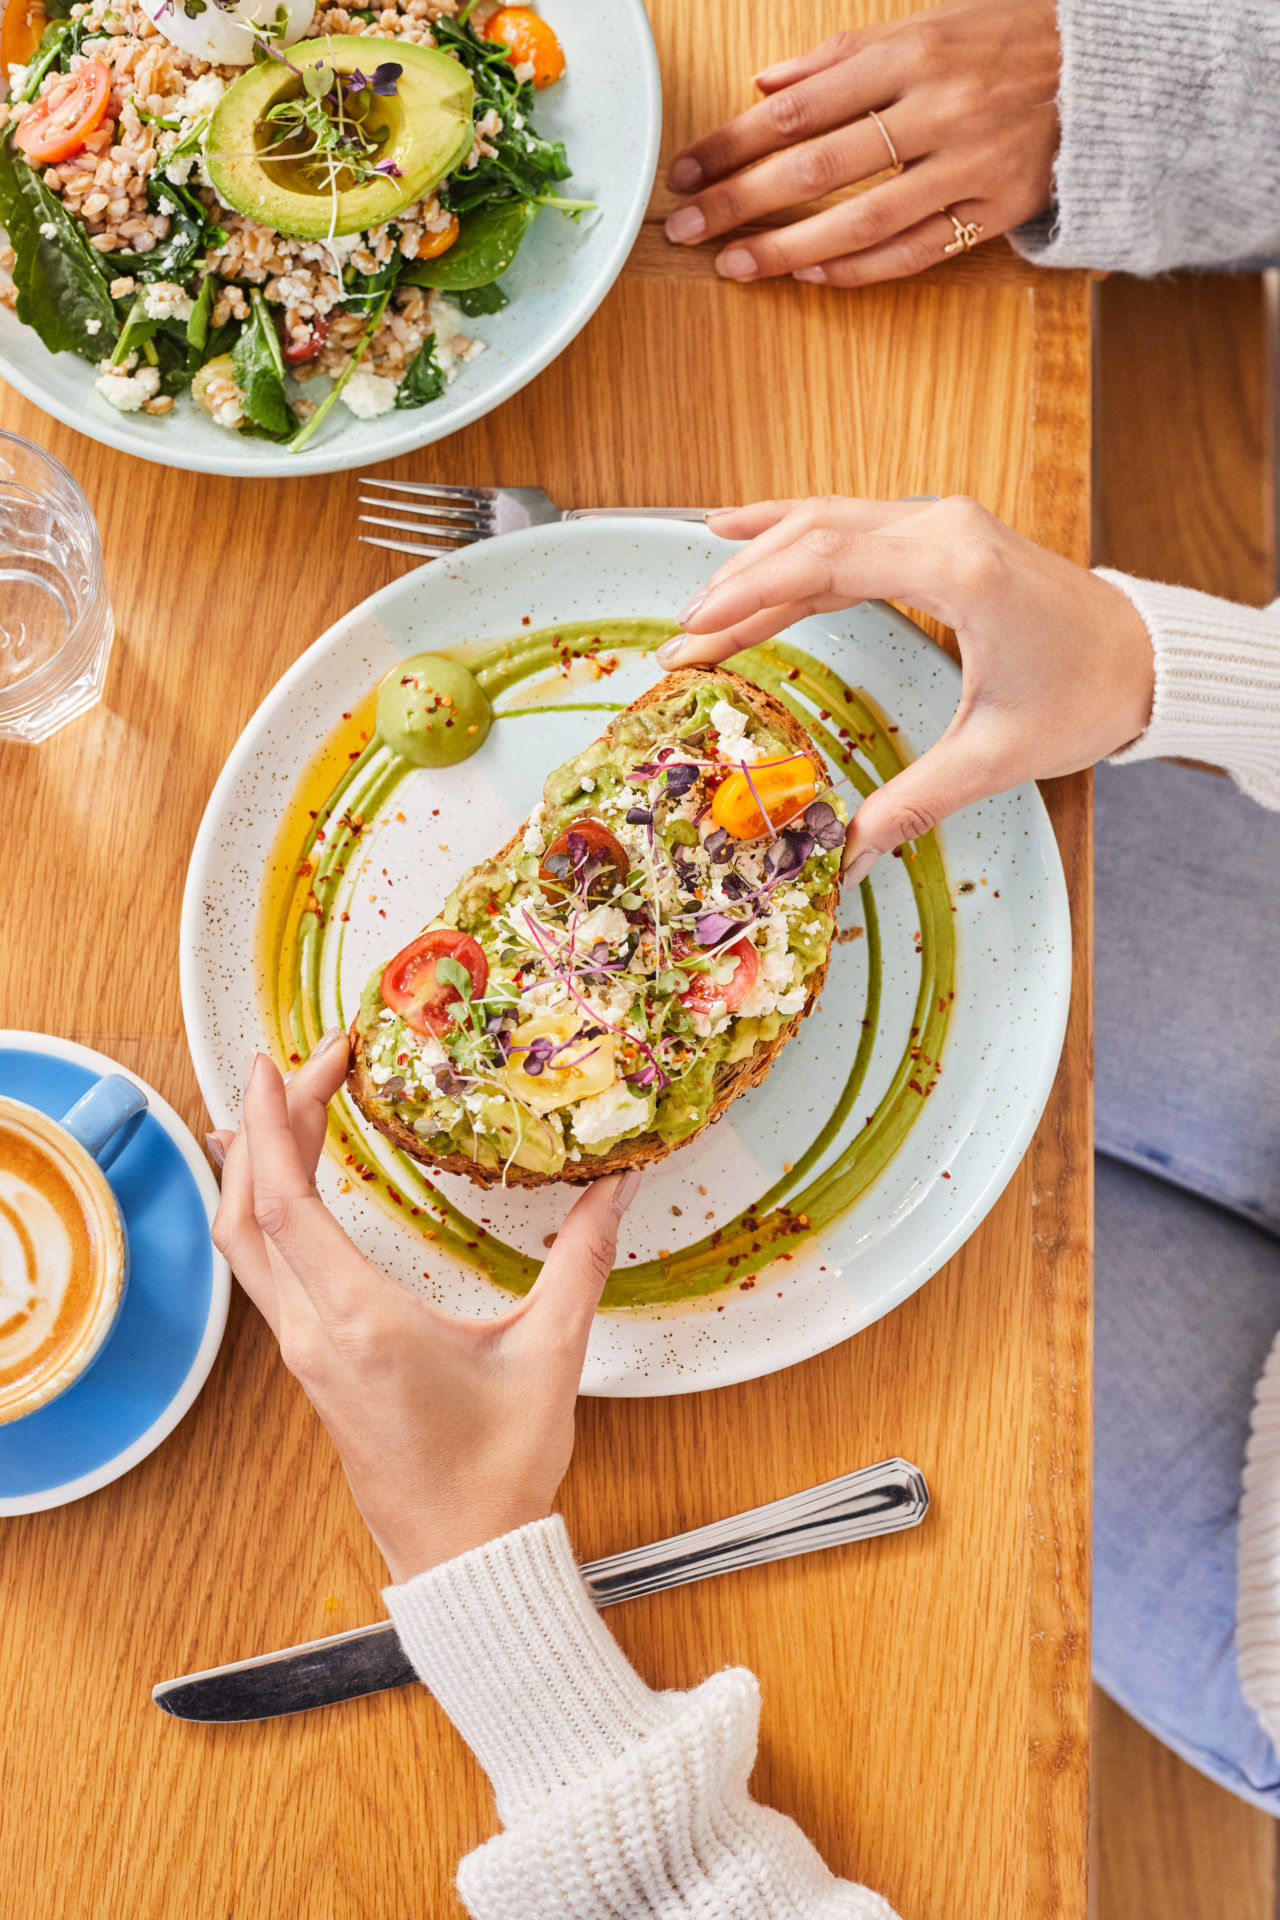 Birds eye view of a woman's hands holding a piece of avocado toast above a plate.